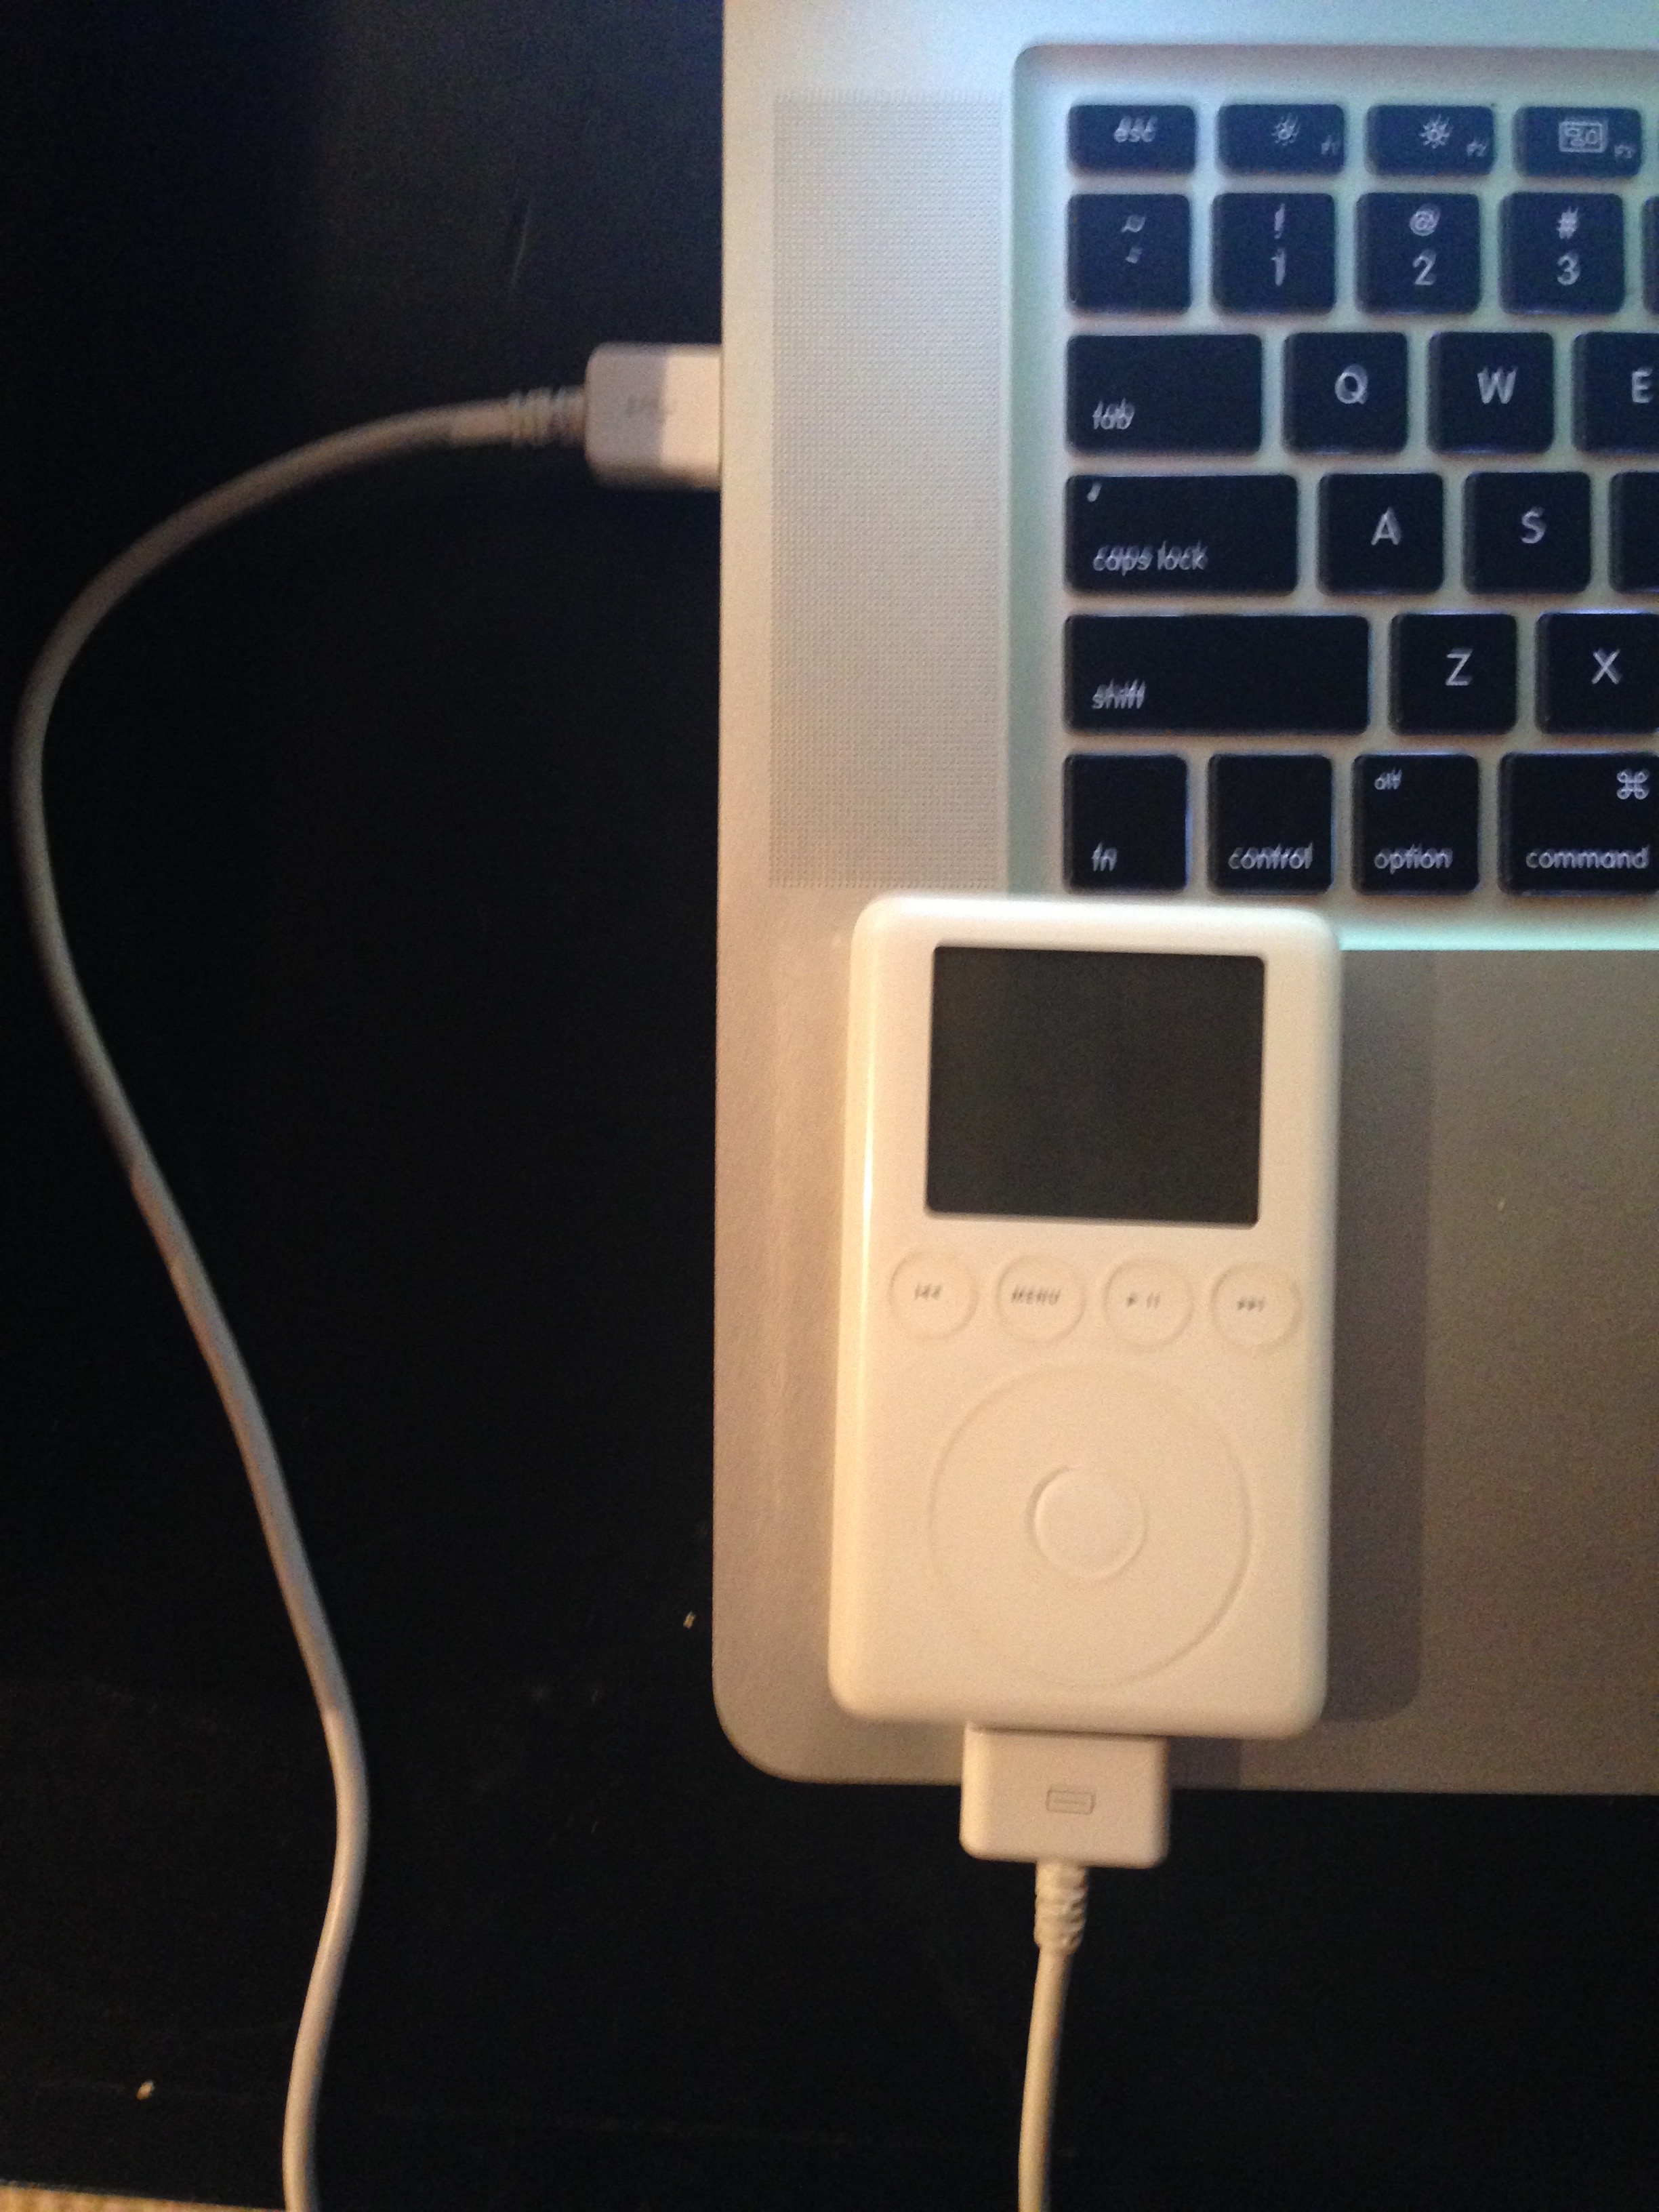 iPod Classic (3rd Gen) Power Issue | MacRumors Forums